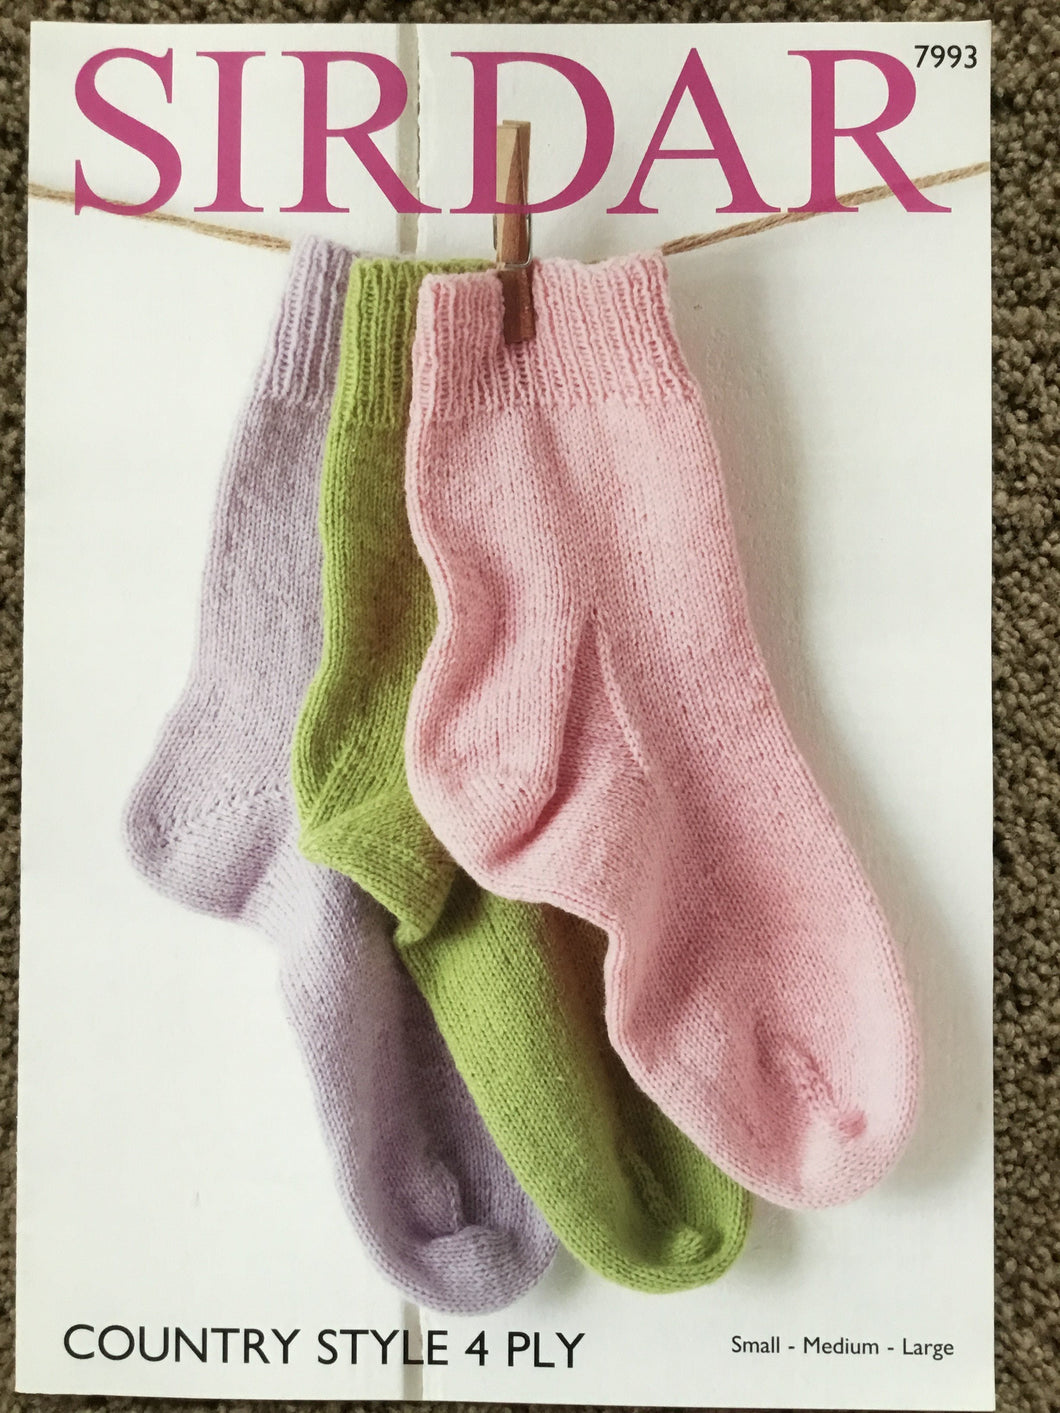 Sirdar Accessories ( Socks, Scarfs, Throws and Cushions )Patterns